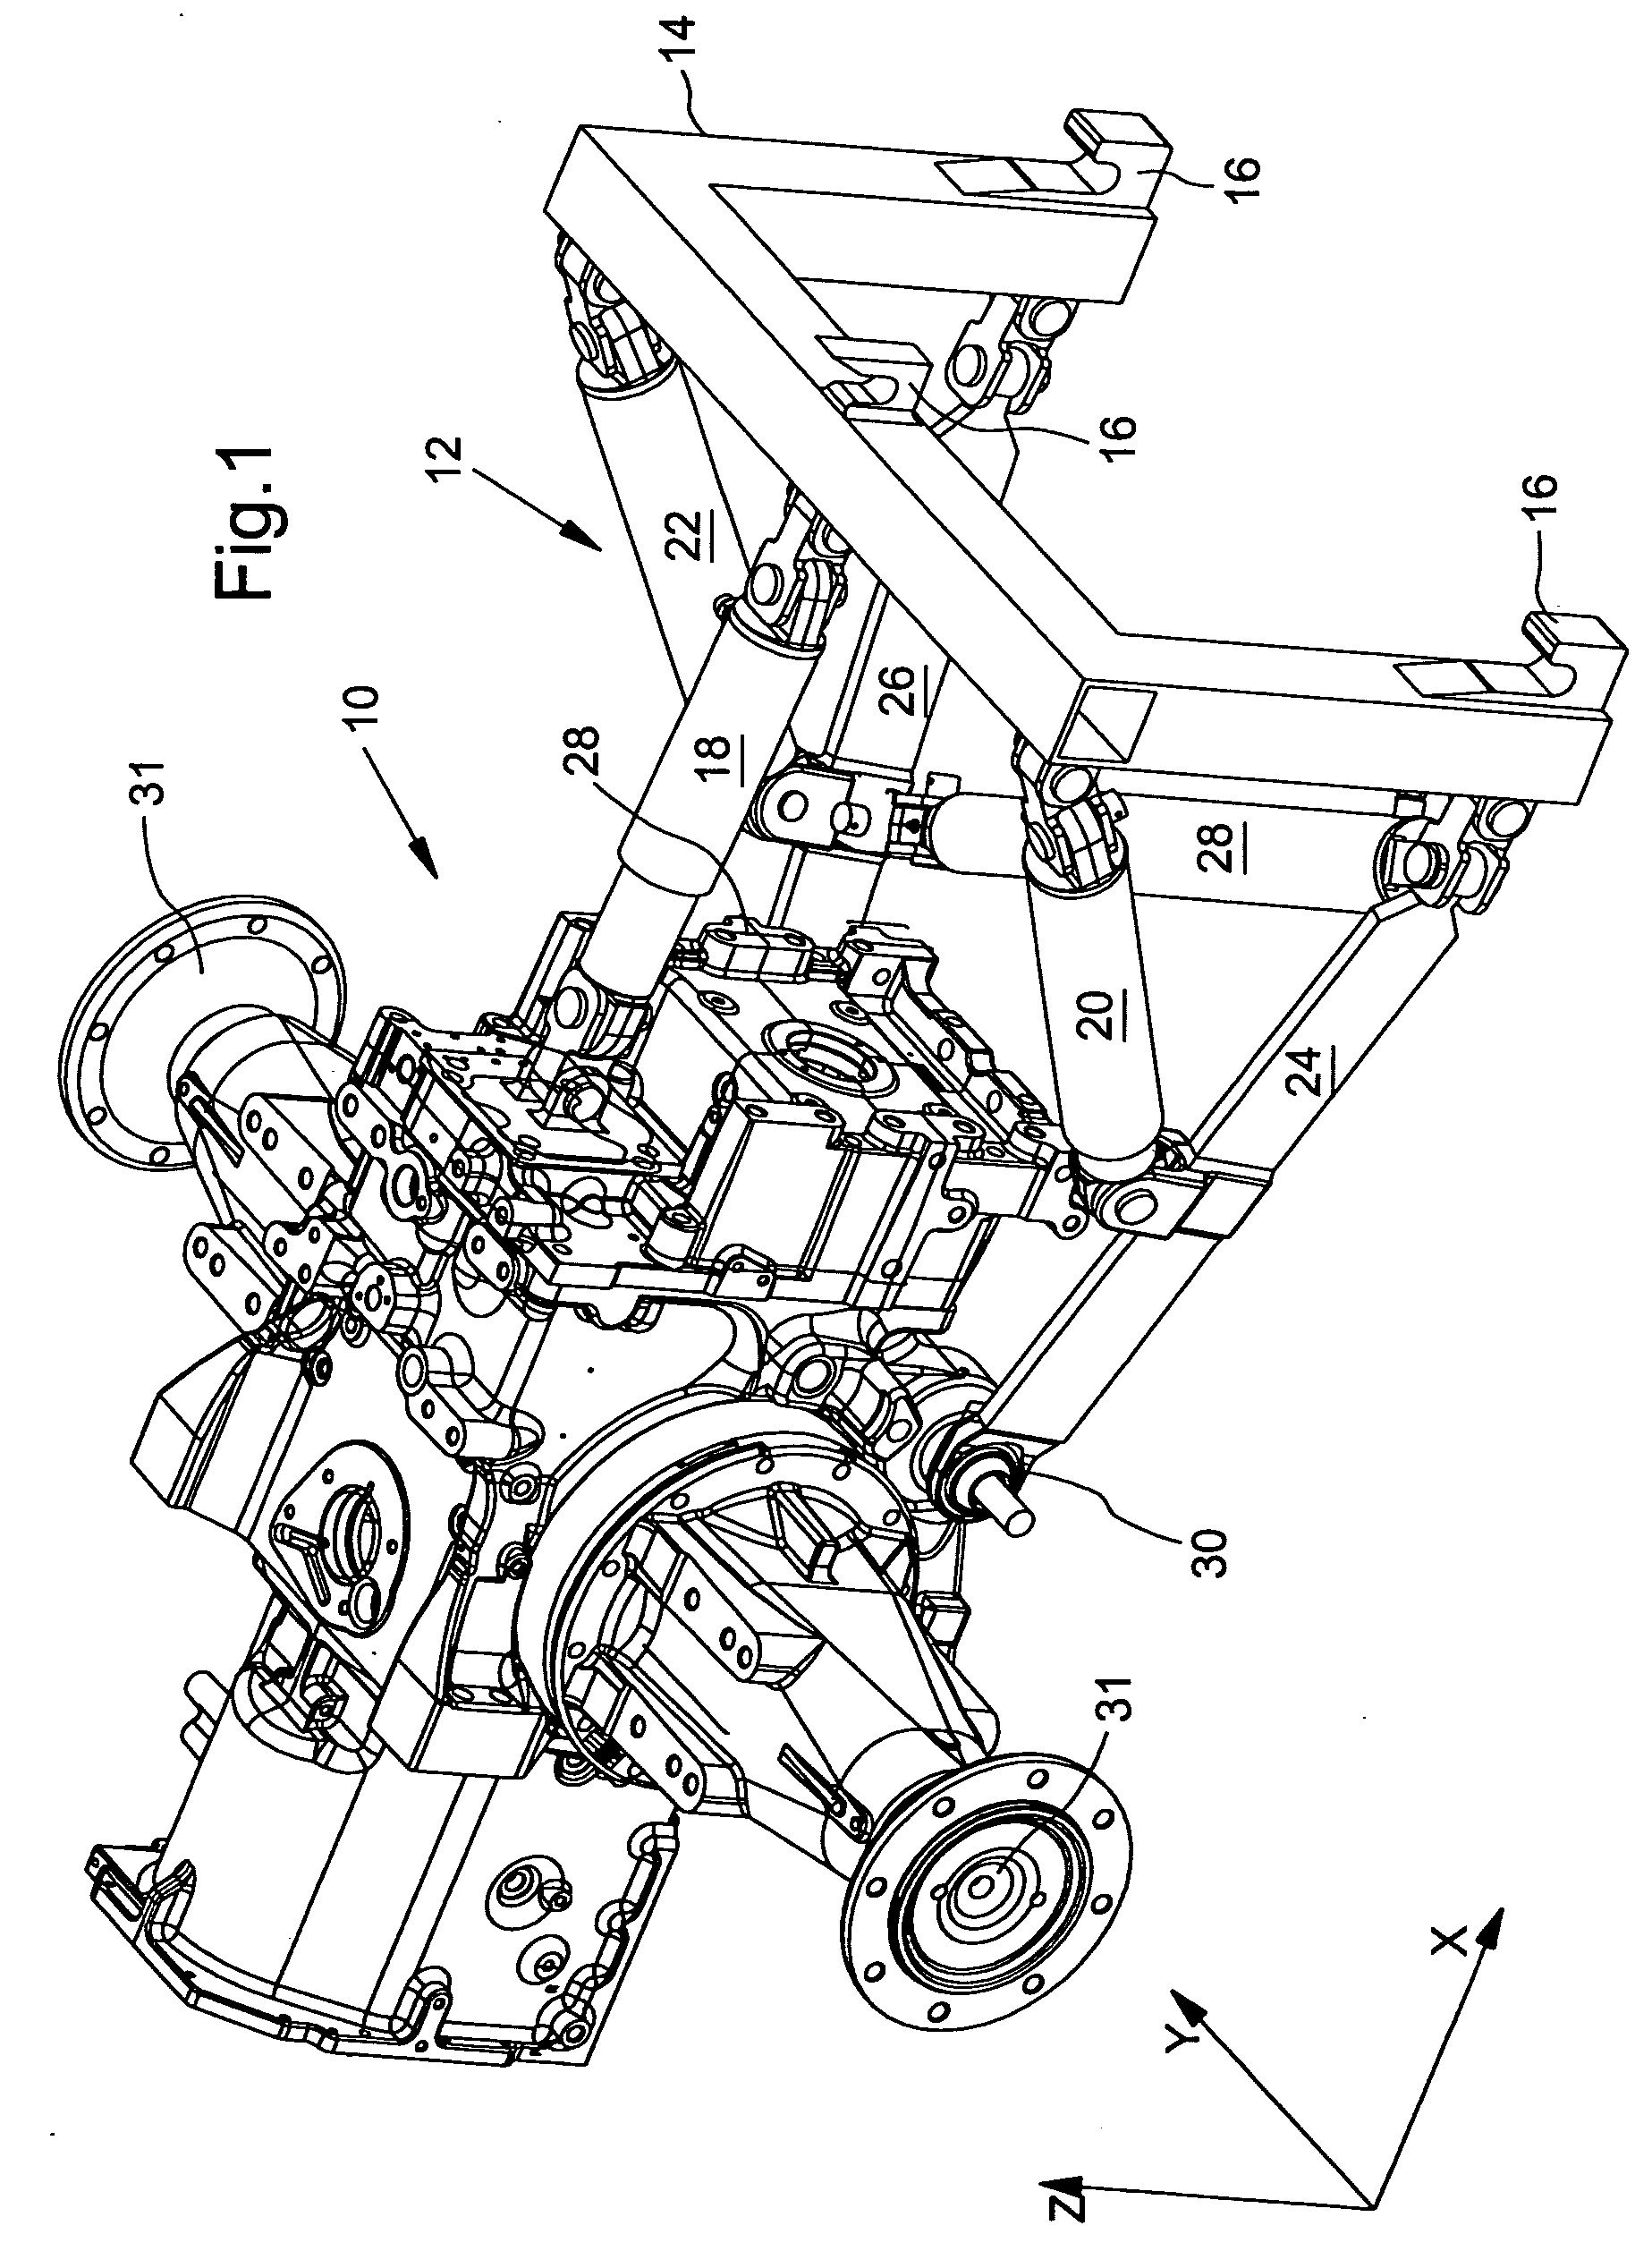 Apparatus for coupling an implement to a working vehicle